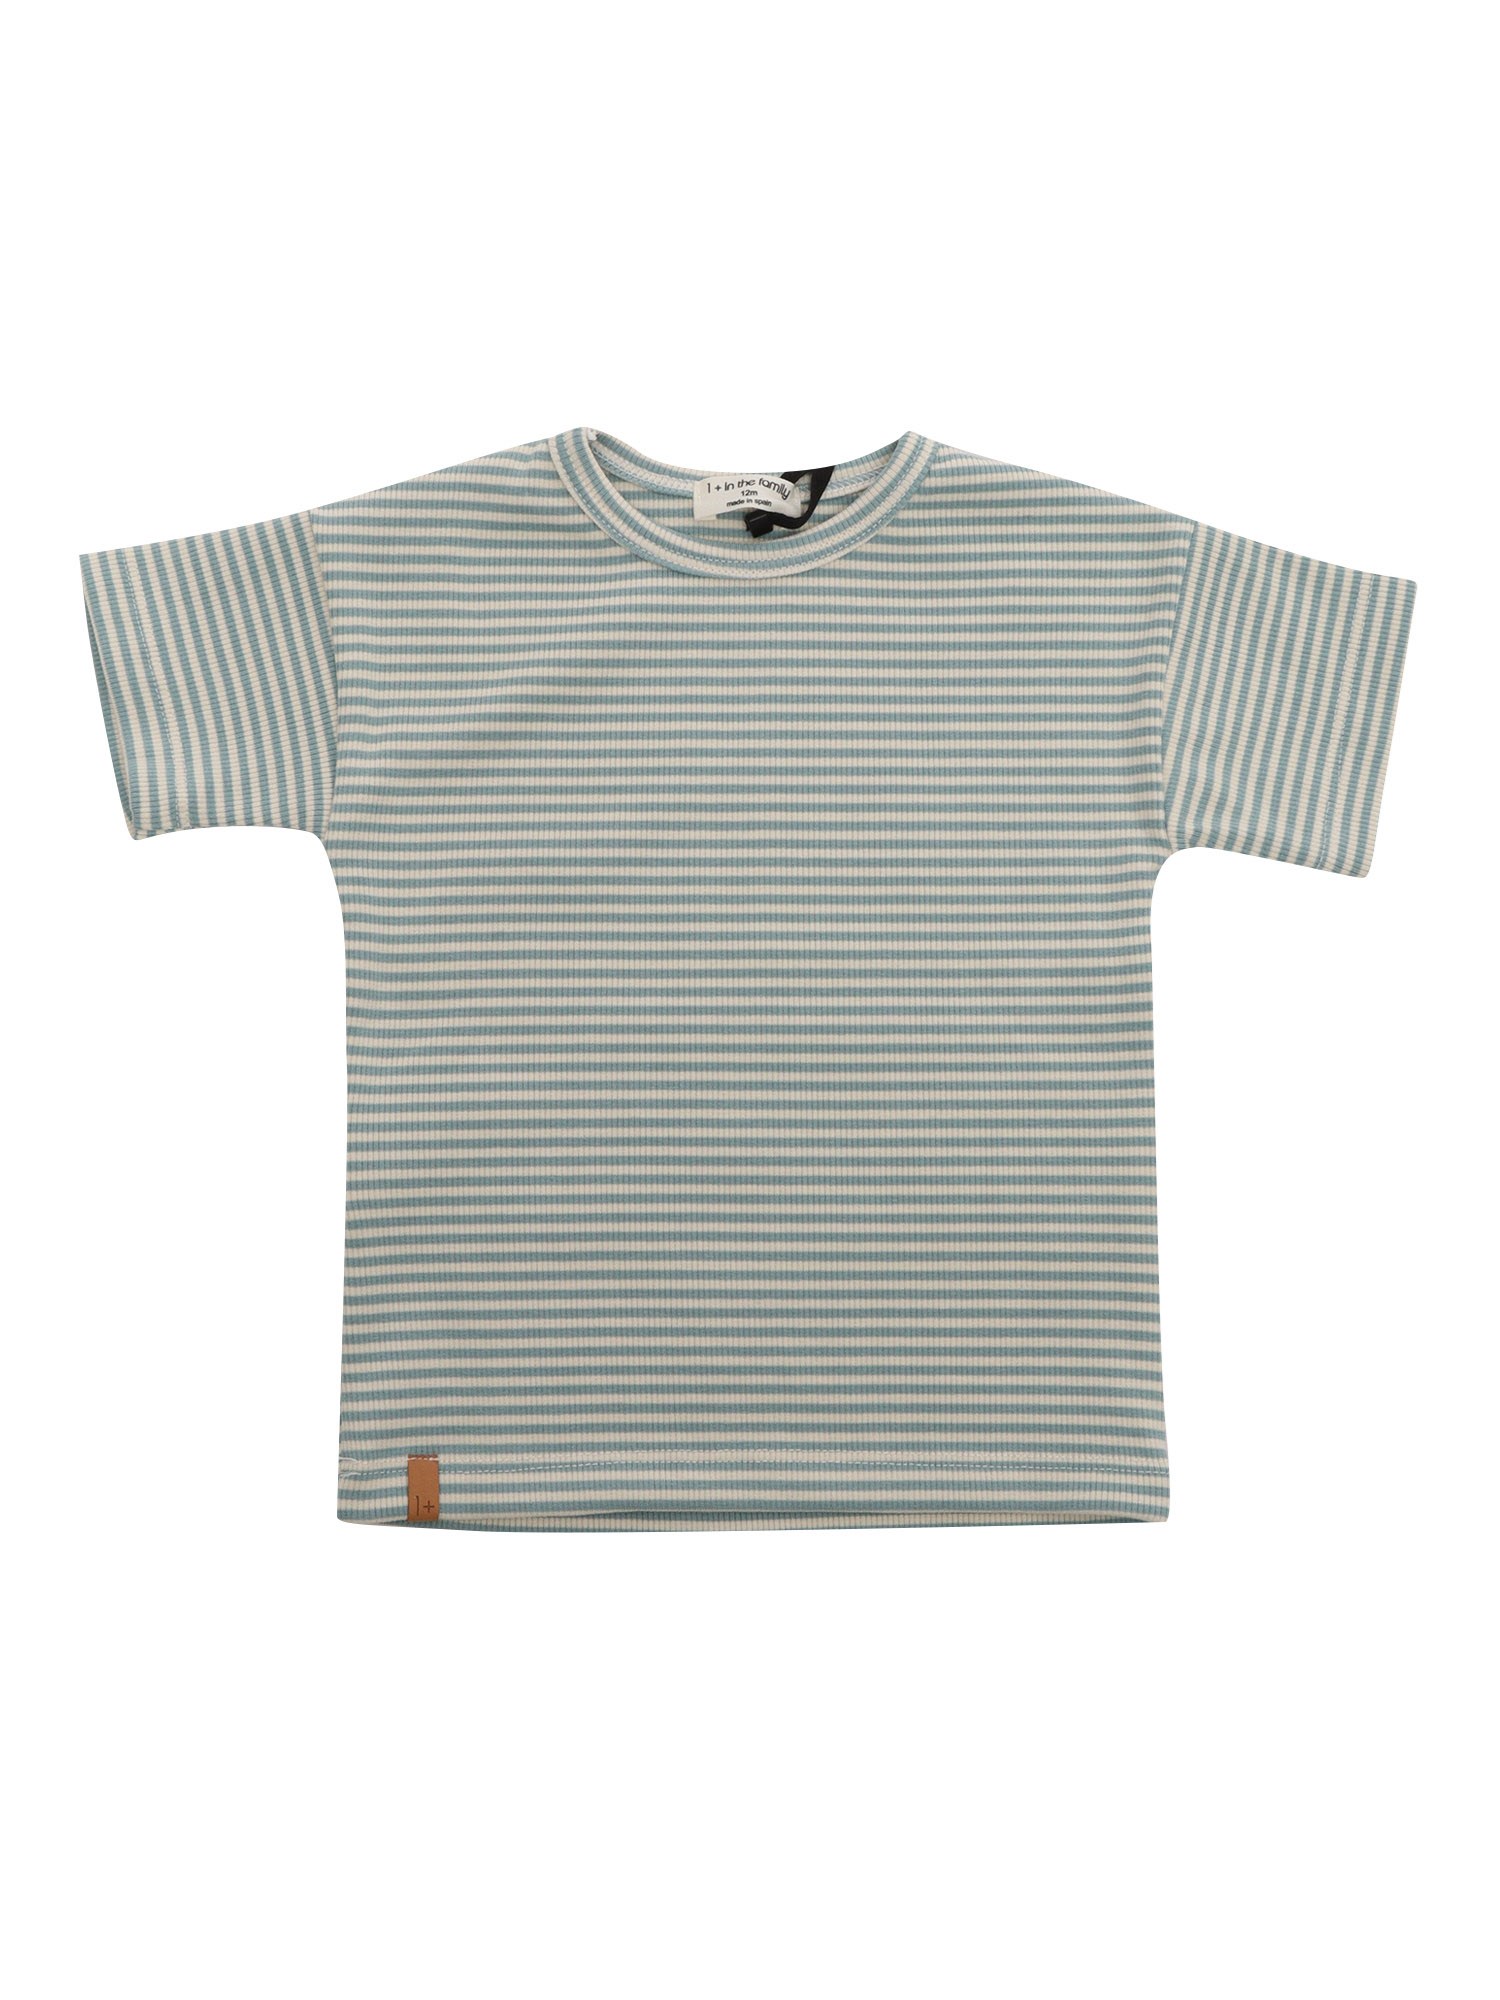 One More In The Family Striped T-shirt In Gray